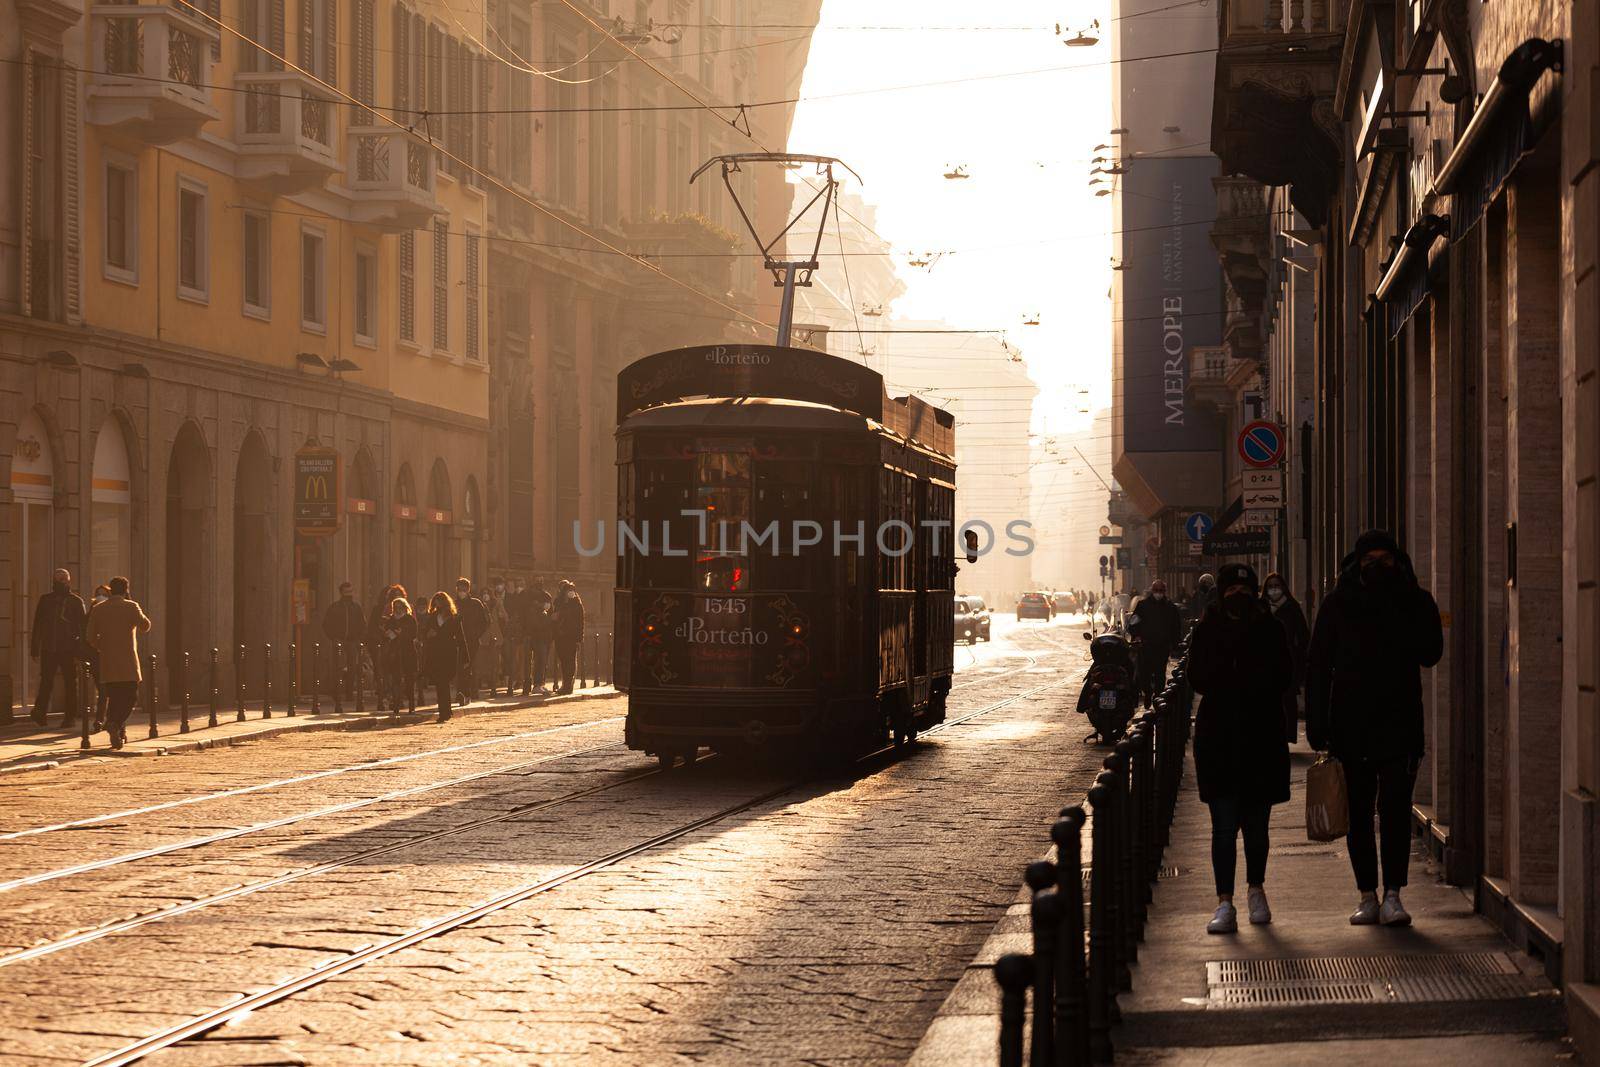 Old vintage tram on the street of Milan, Italy by bepsimage